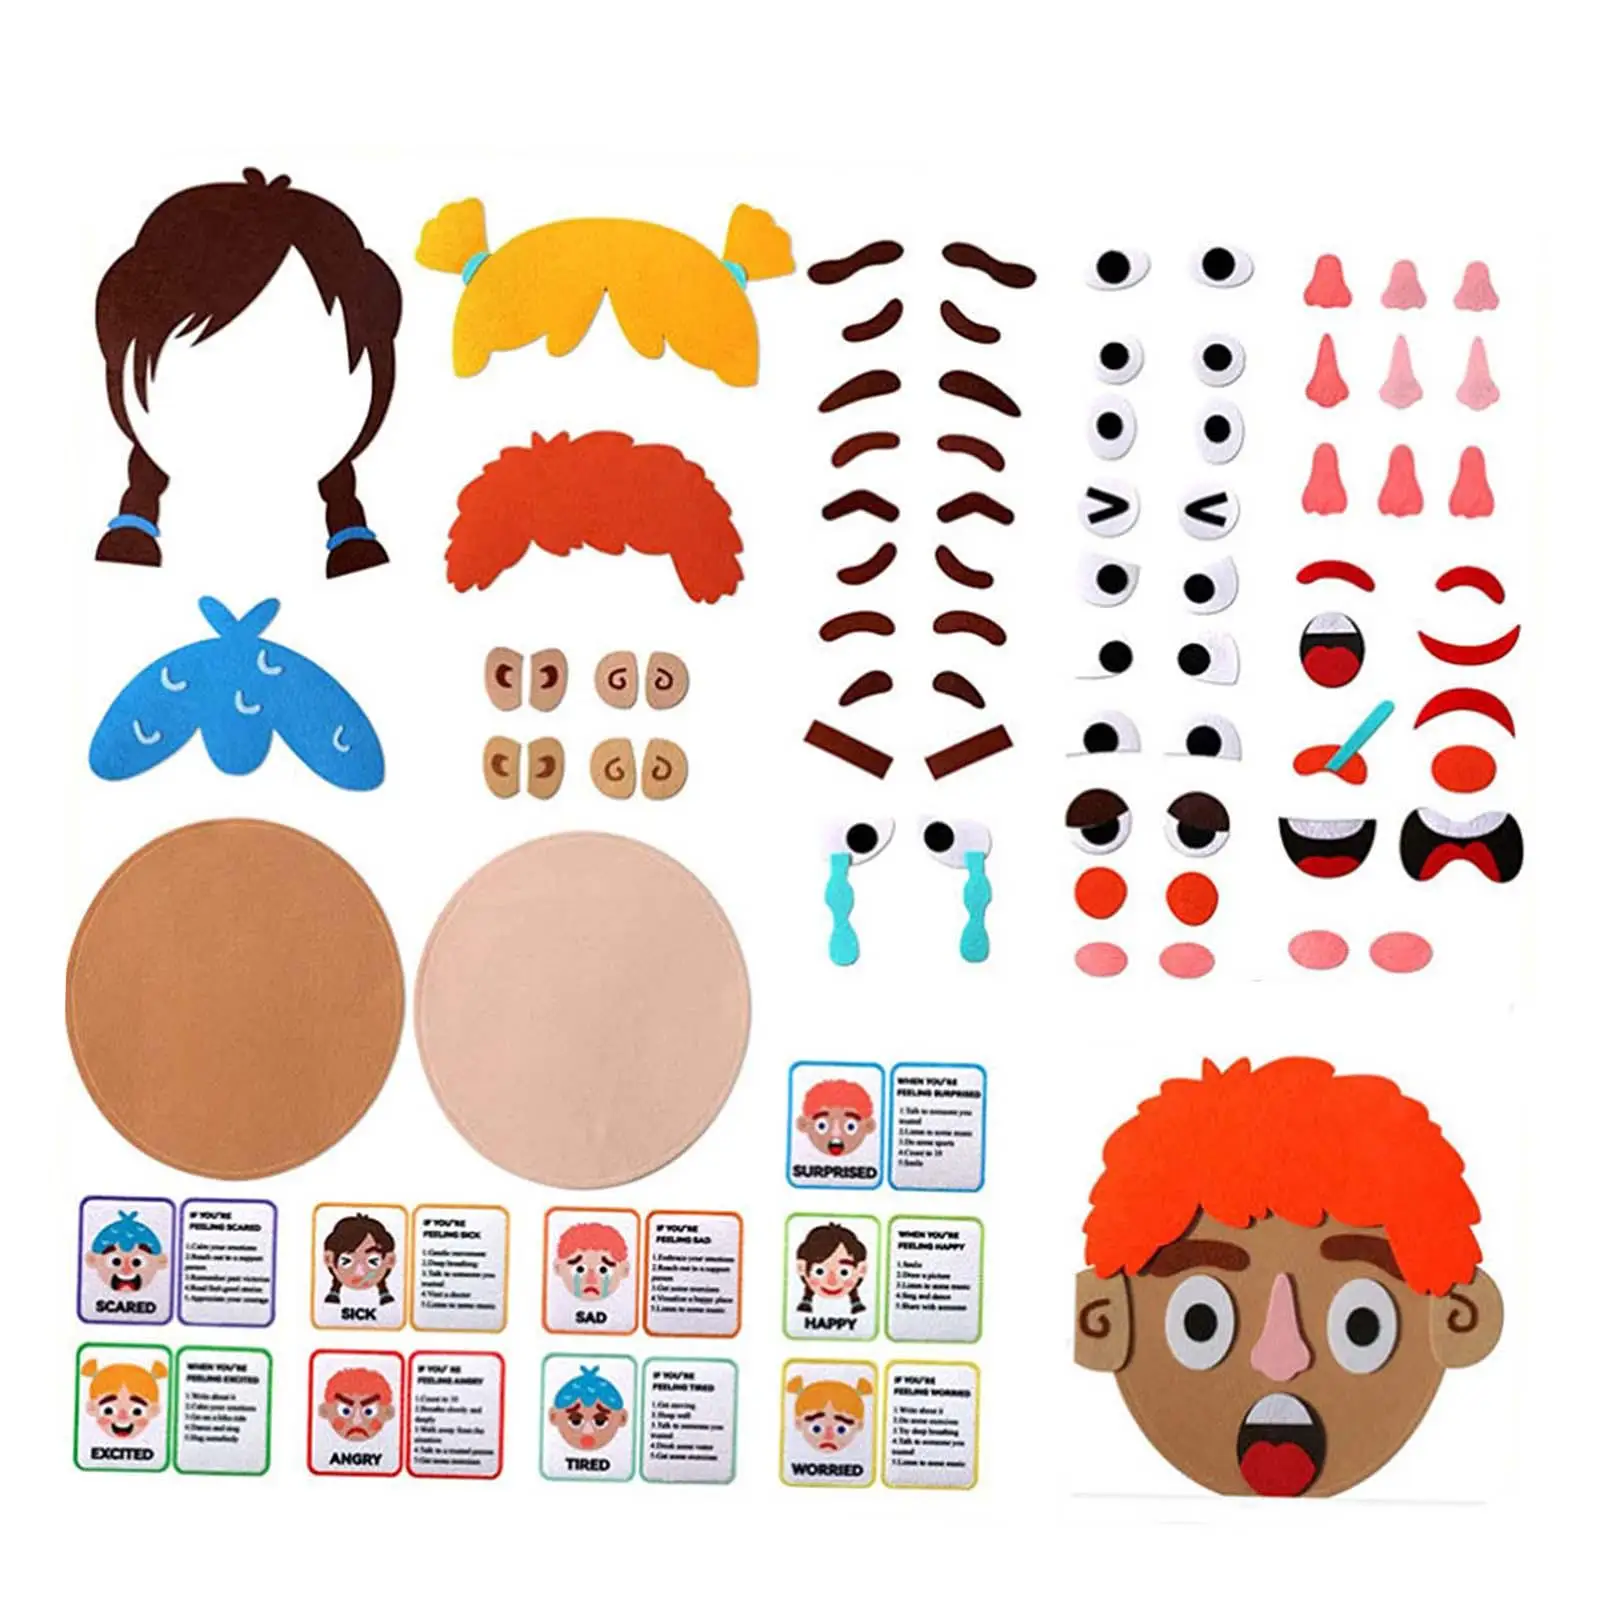 Kids Social Emotional Learning Learning Social Skills Learn about Emotions Make A Funny Faces Stickers Games for Children Boys